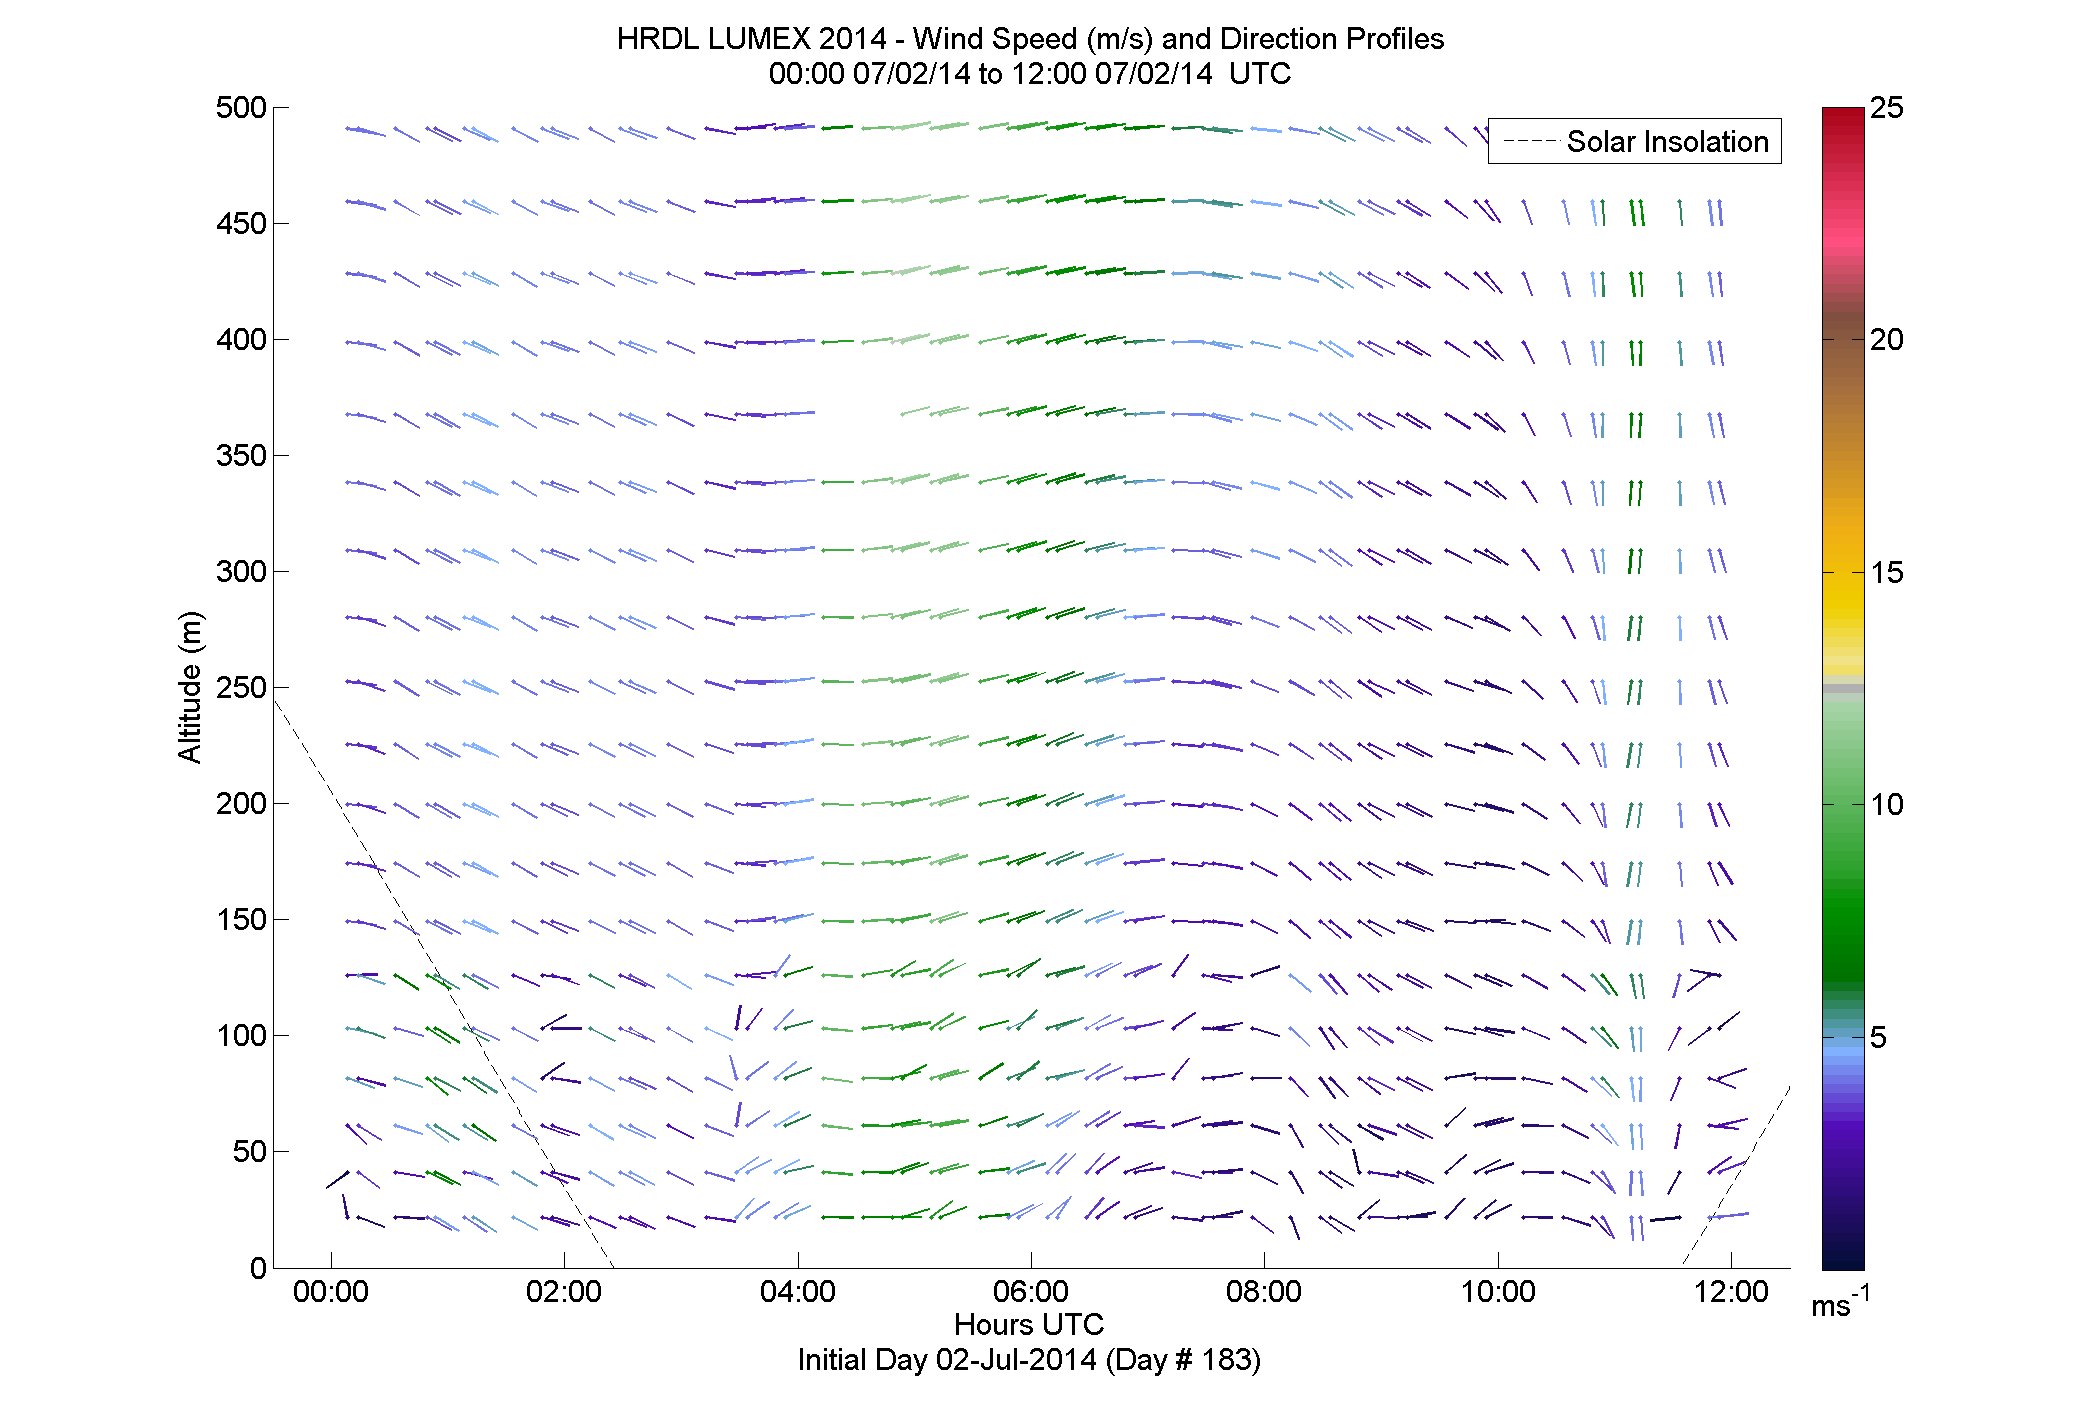 HRDL speed and direction profile - July 2 am